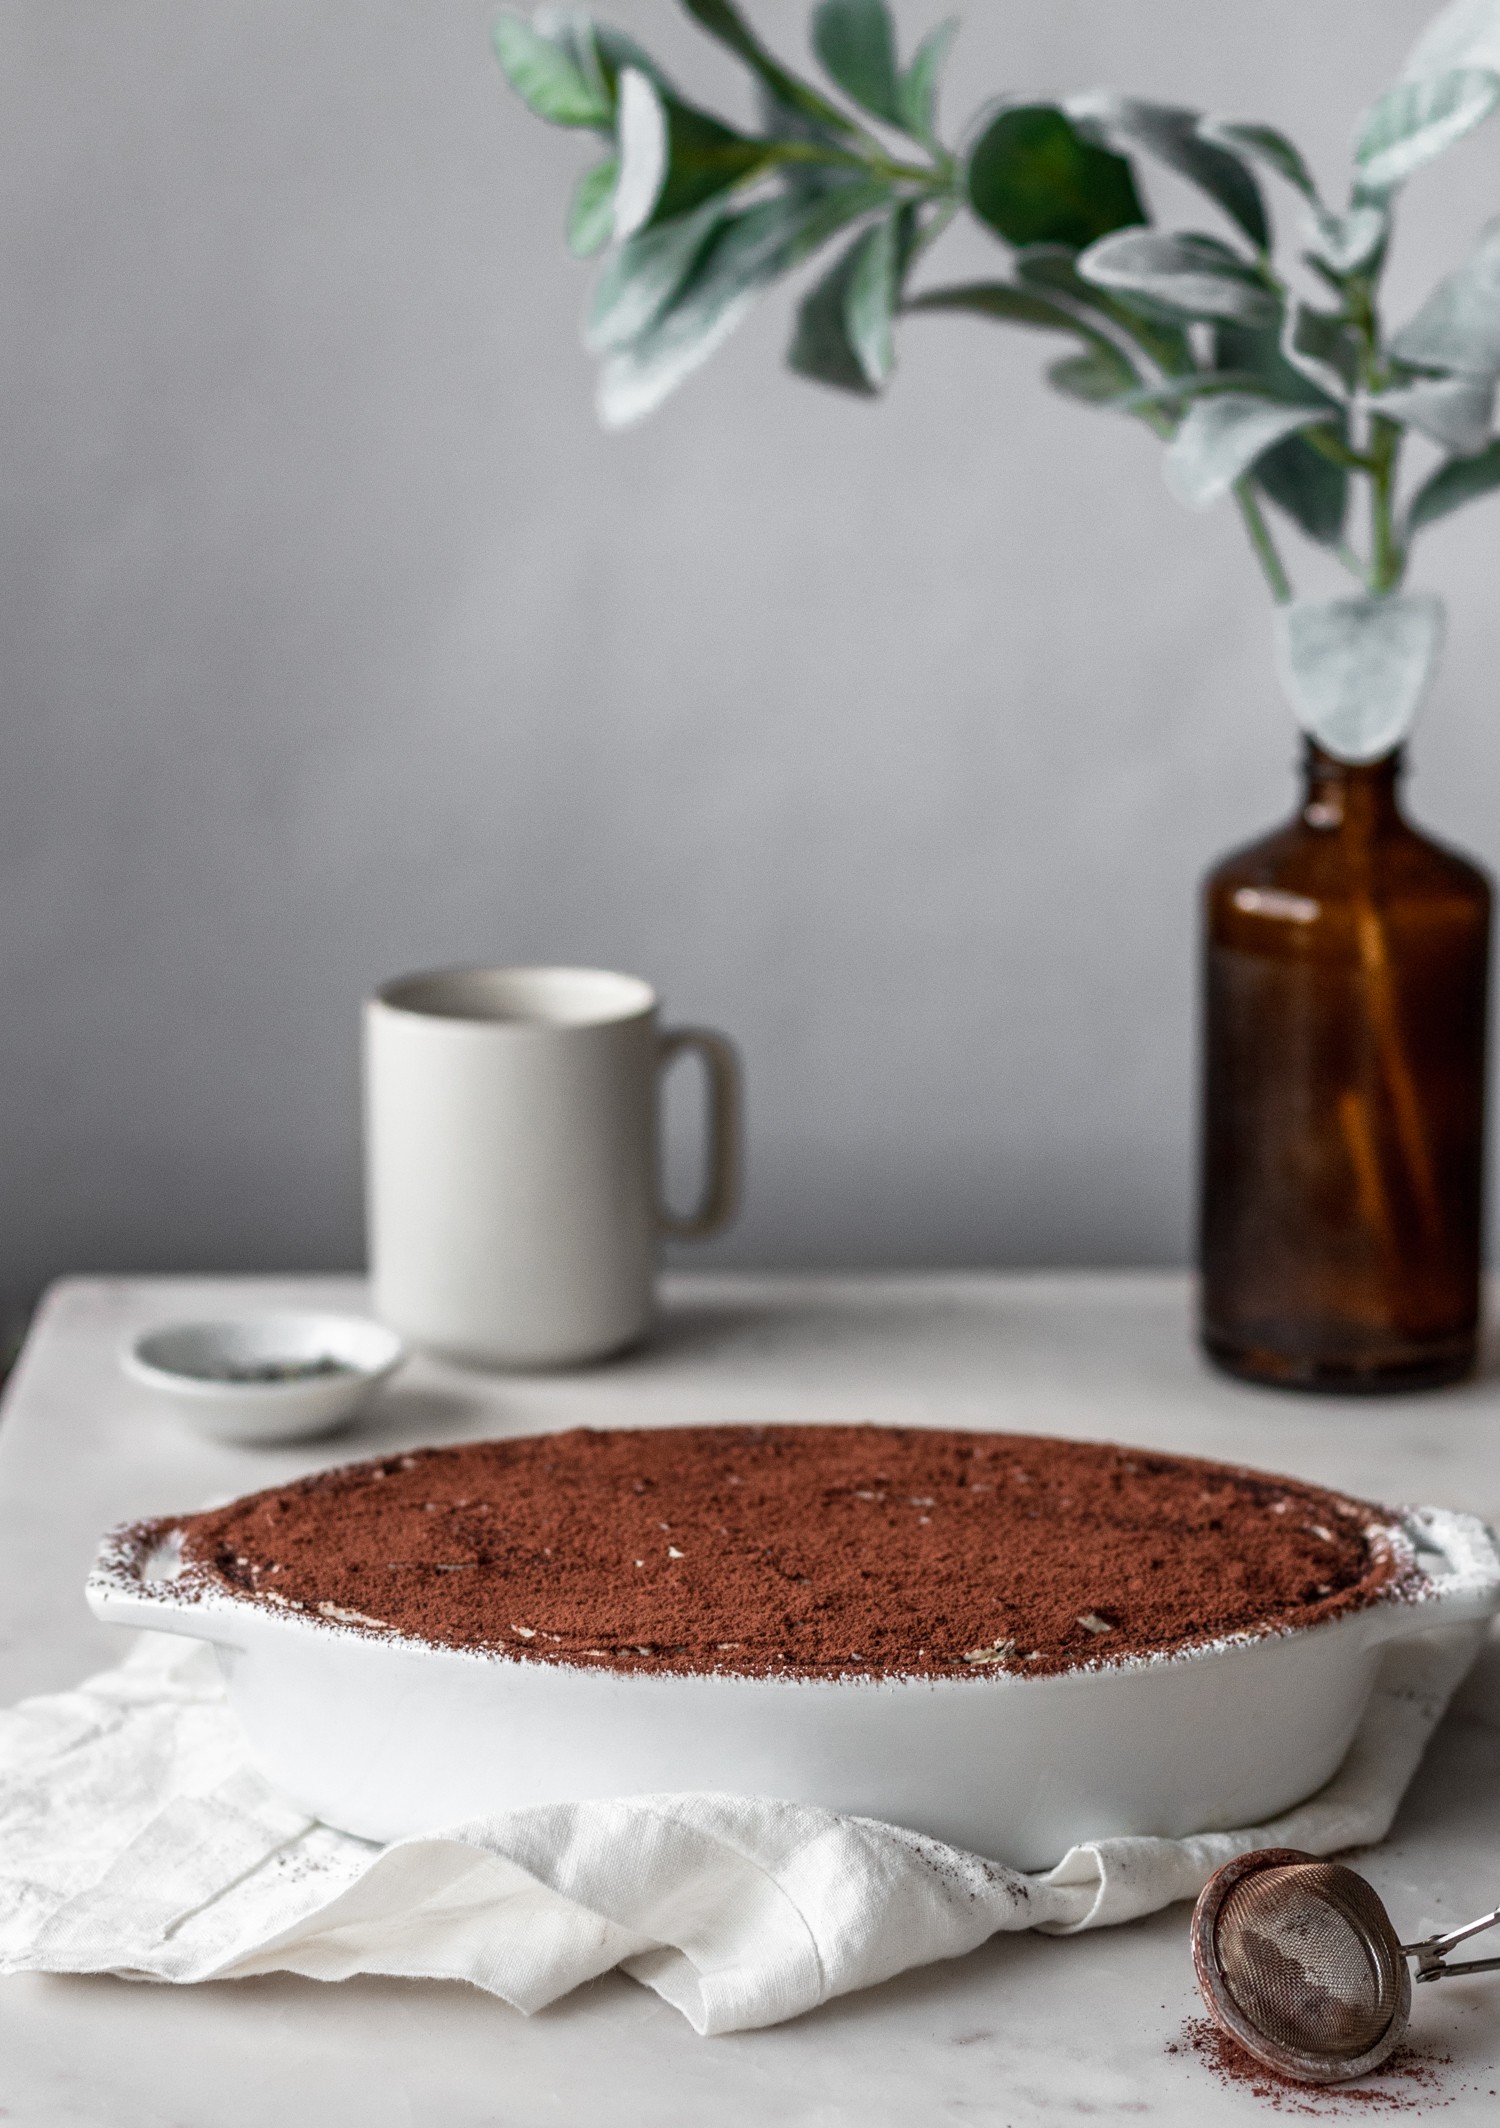 A white dish of London fog tiramisu on a white counter with eucalyptus leaves and a cup of tea in the background.